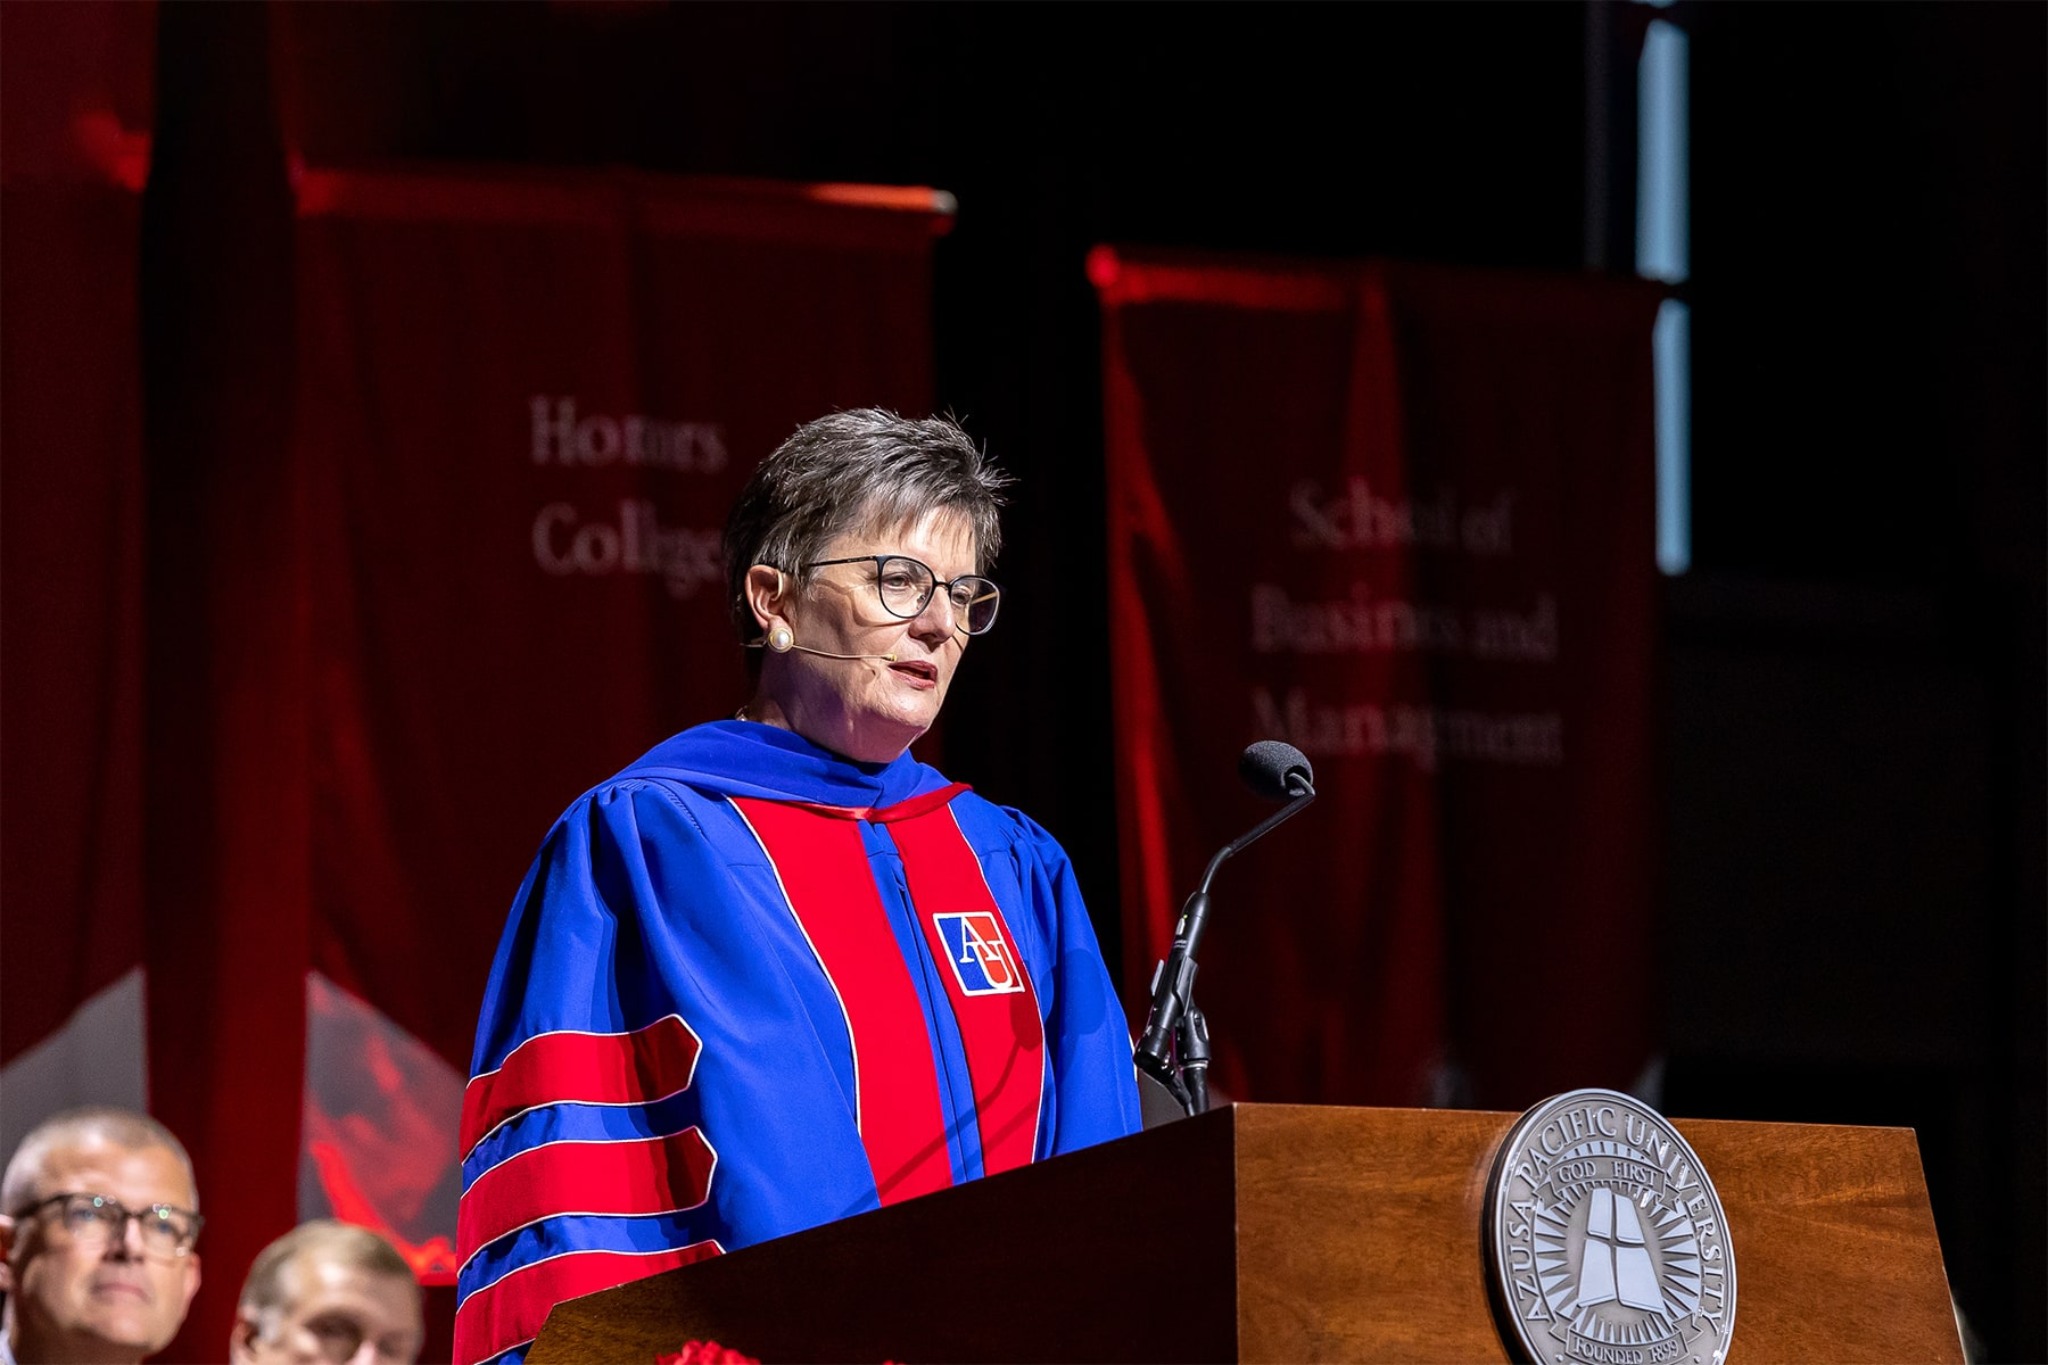 woman wearing an academic regalia during a commencement event